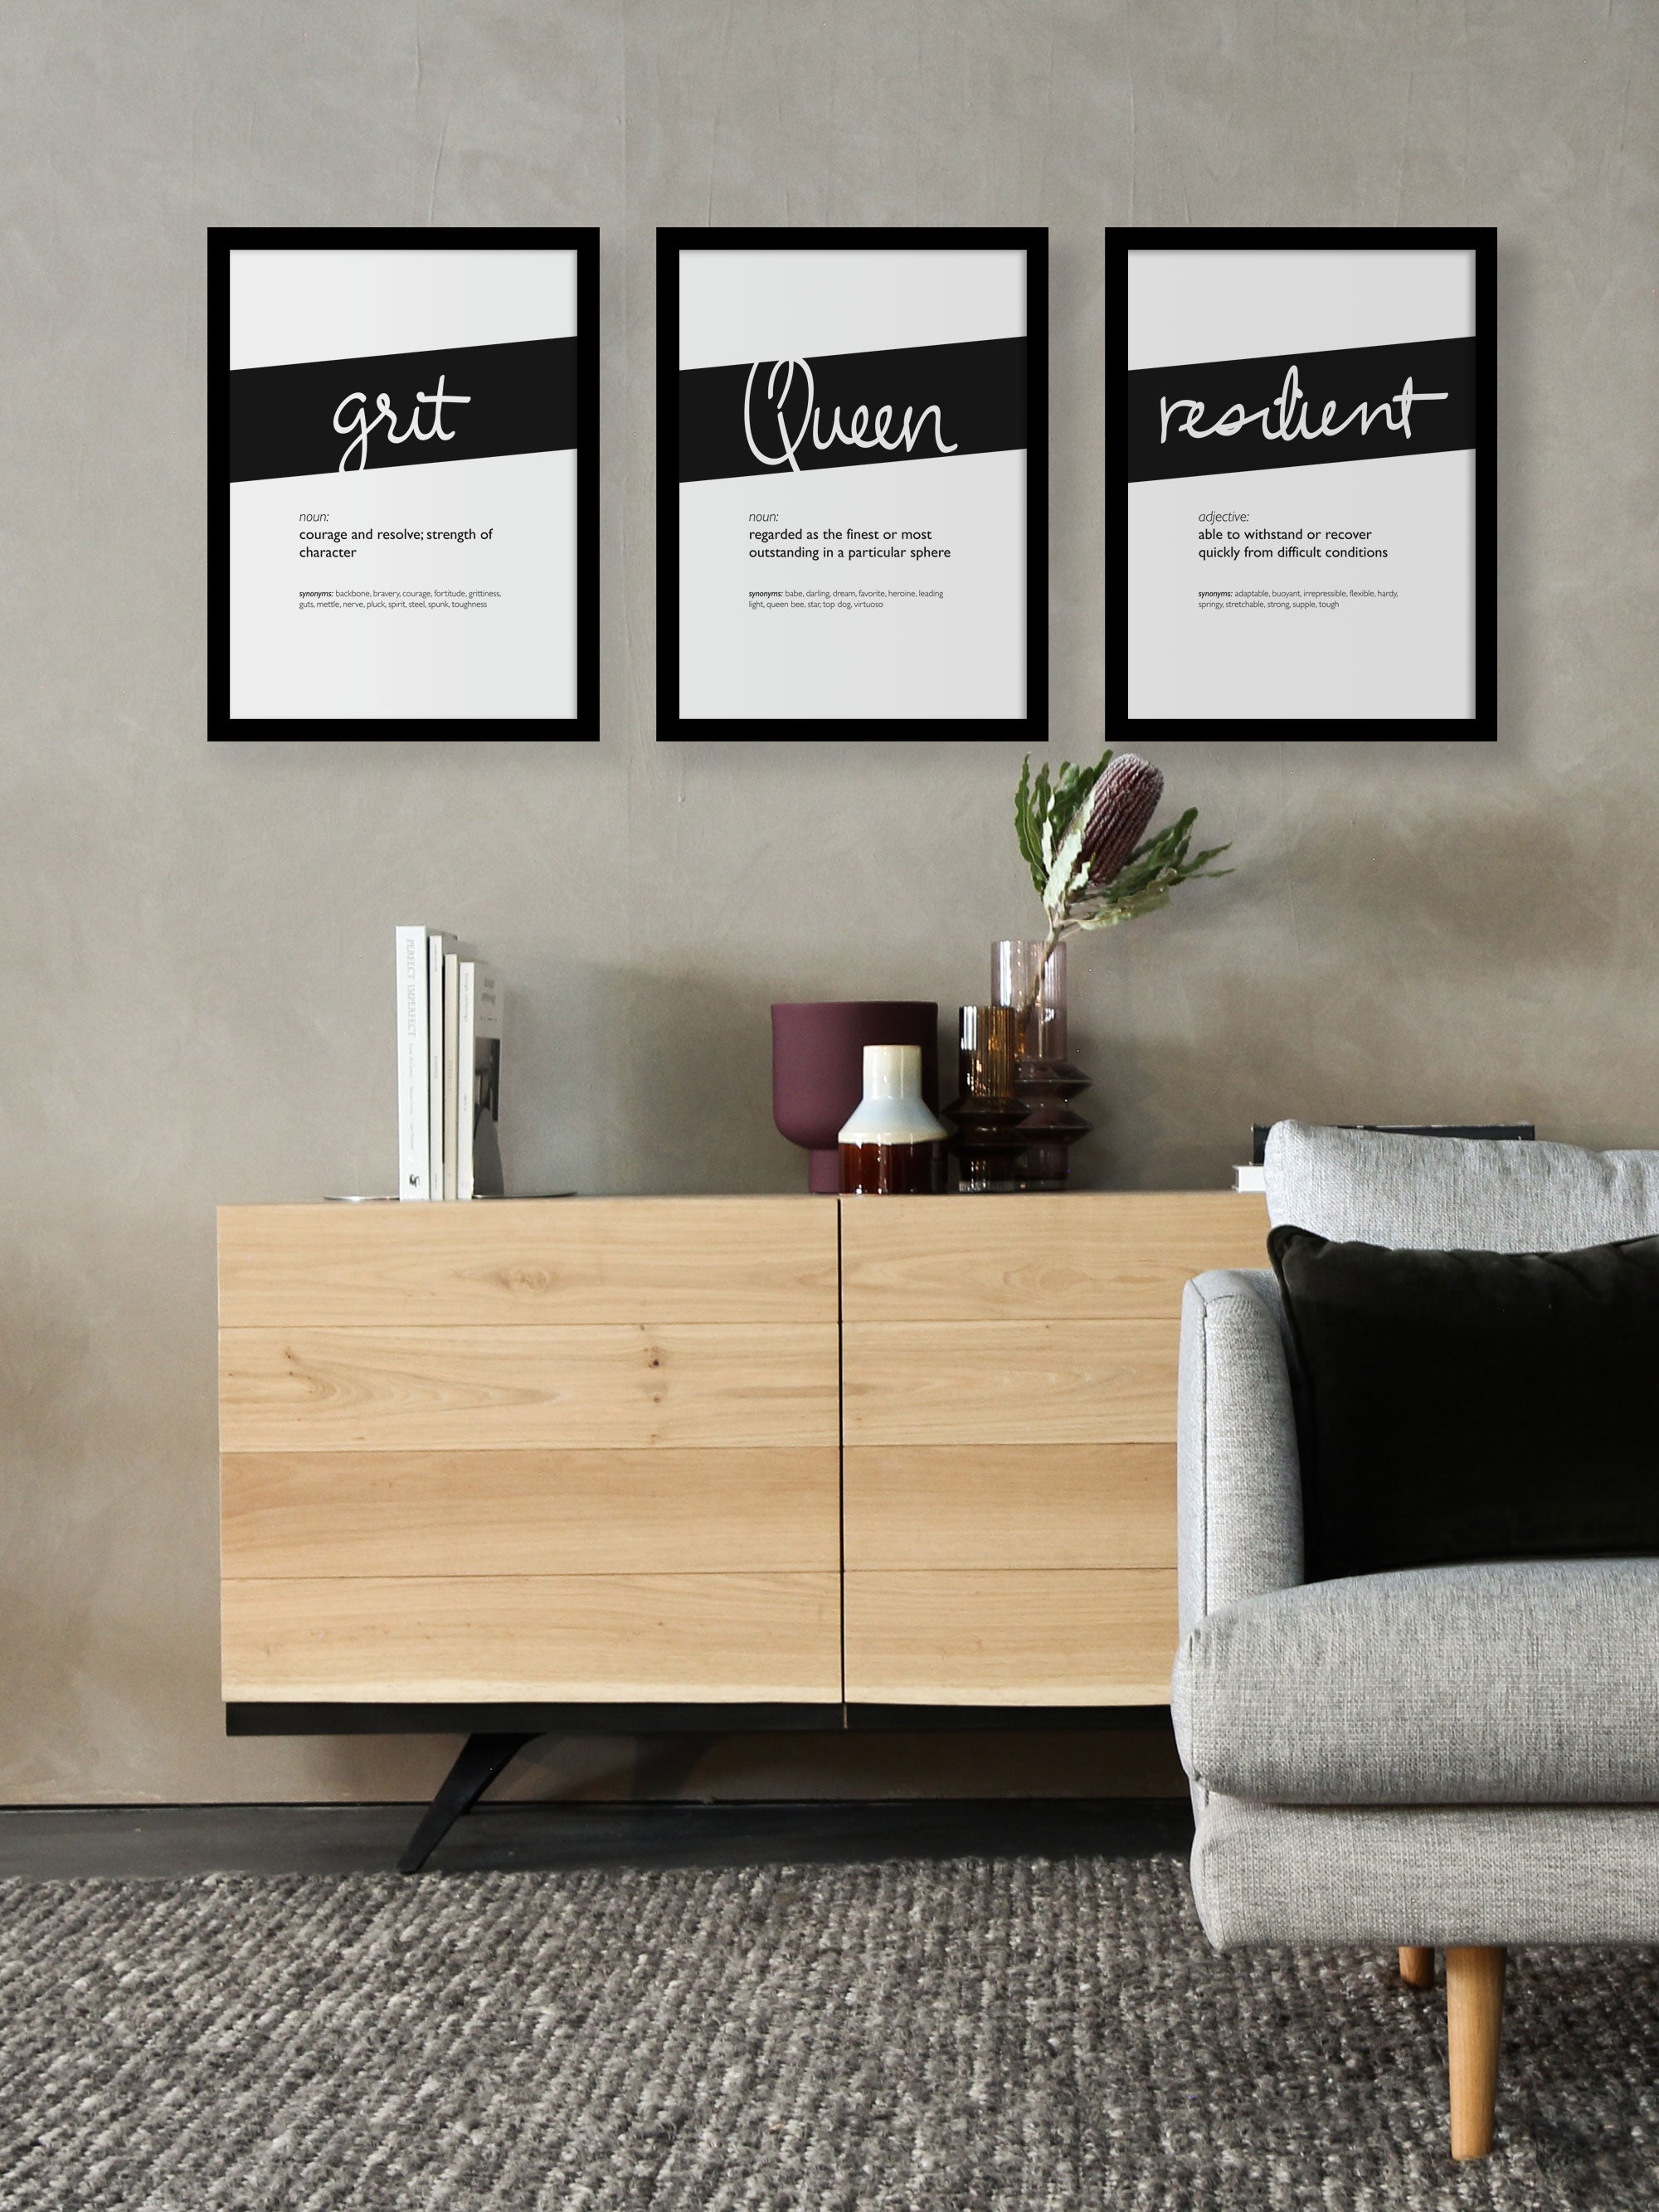 Framed Black Resilient Print With Word Definition - High Quality, Affordable, Hand Written, Empowering, Self Love, Mantra Word Print. Archival-Quality, Matte Giclée Print - Brevity Jewelry